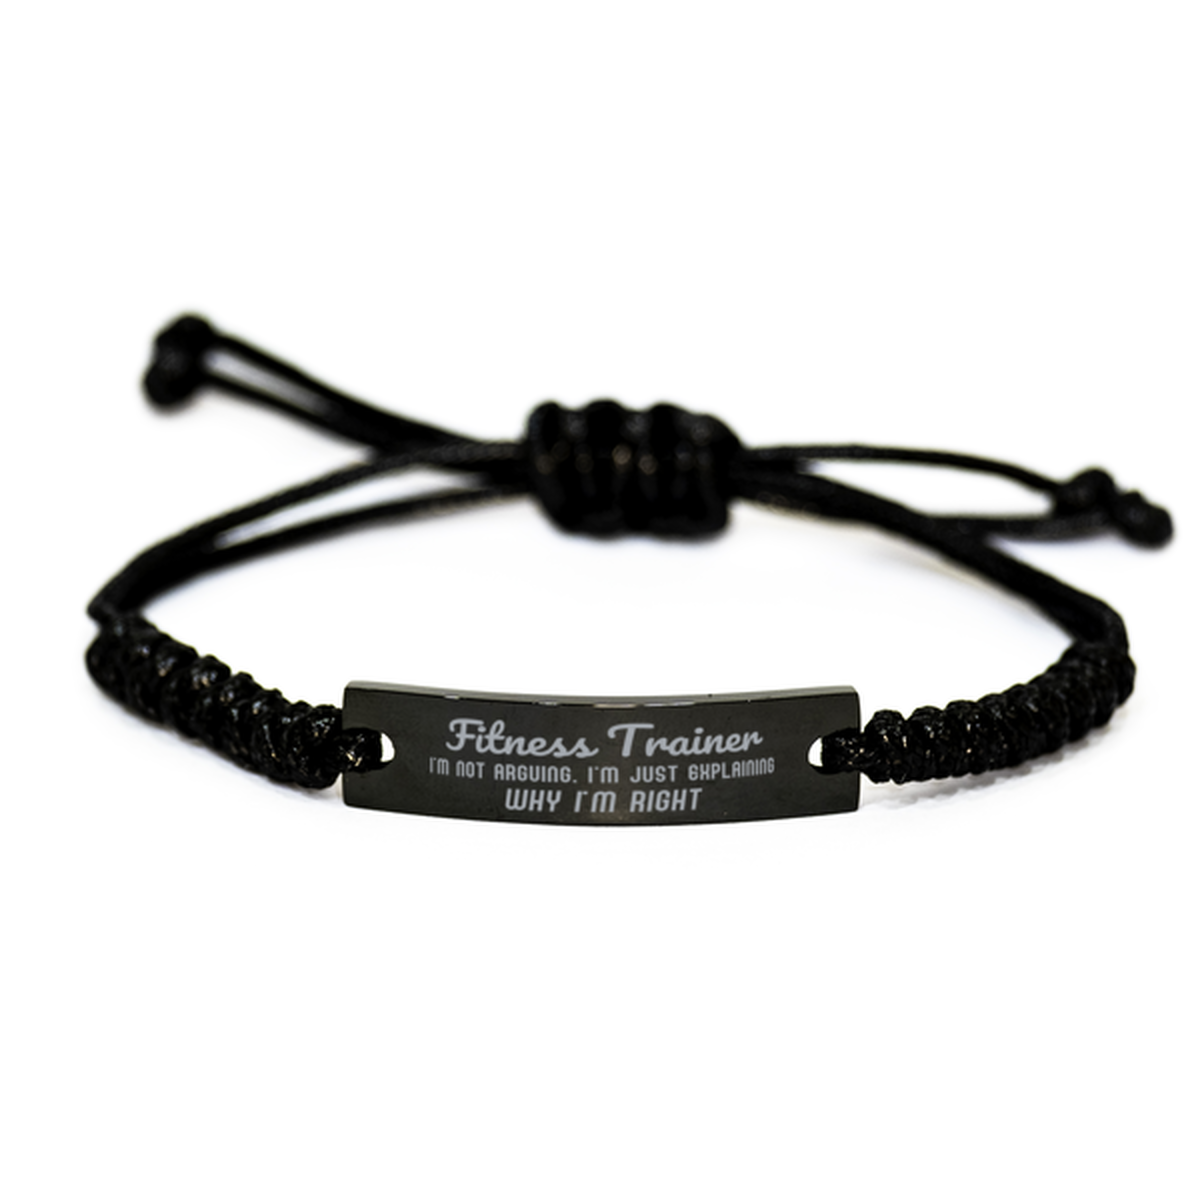 Fitness Trainer I'm not Arguing. I'm Just Explaining Why I'm RIGHT Black Rope Bracelet, Funny Saying Quote Fitness Trainer Gifts For Fitness Trainer Graduation Birthday Christmas Gifts for Men Women Coworker